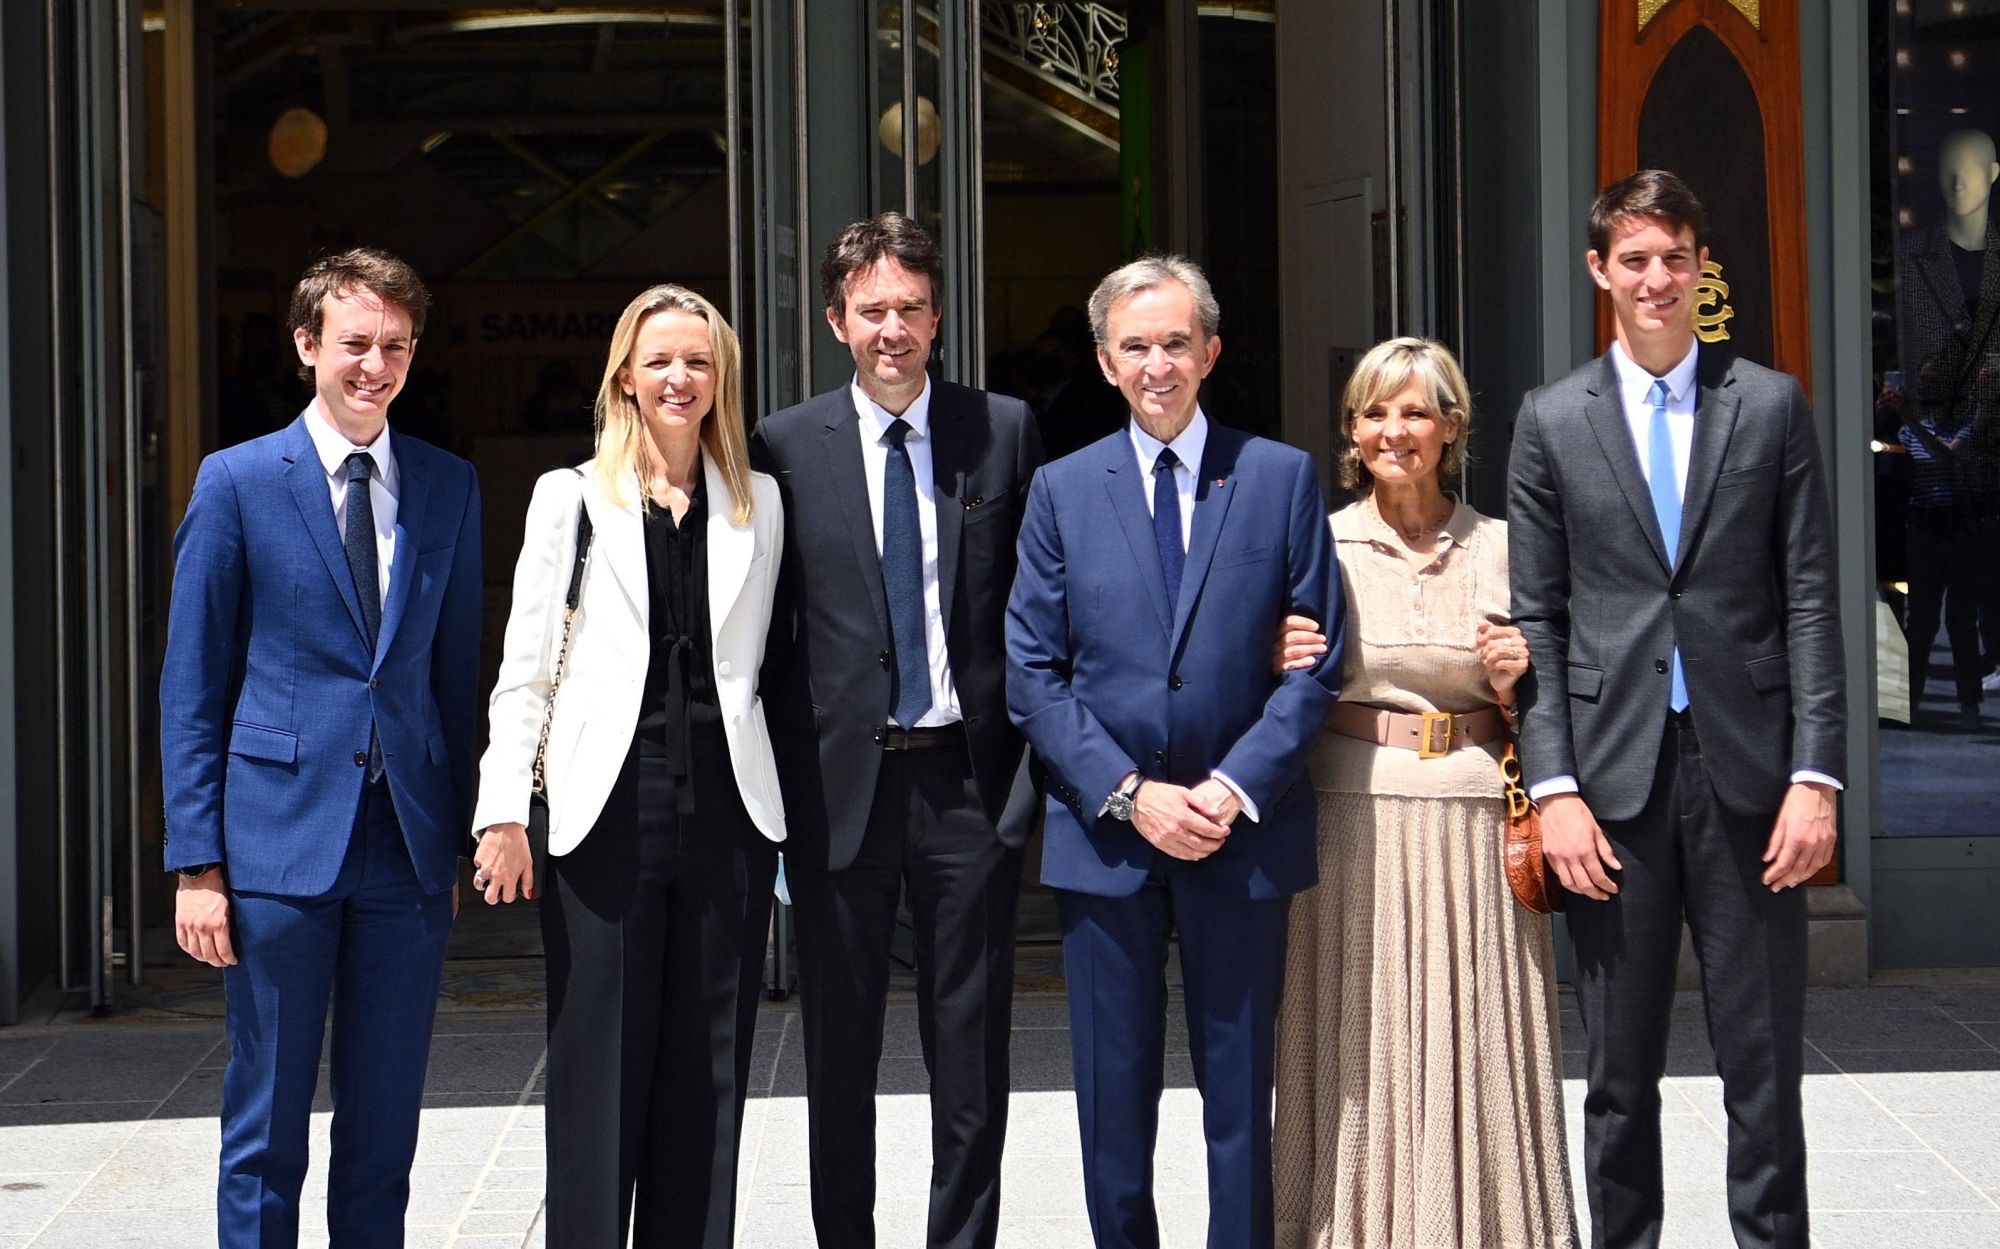 LVMH: control of the Arnaults for 30 years